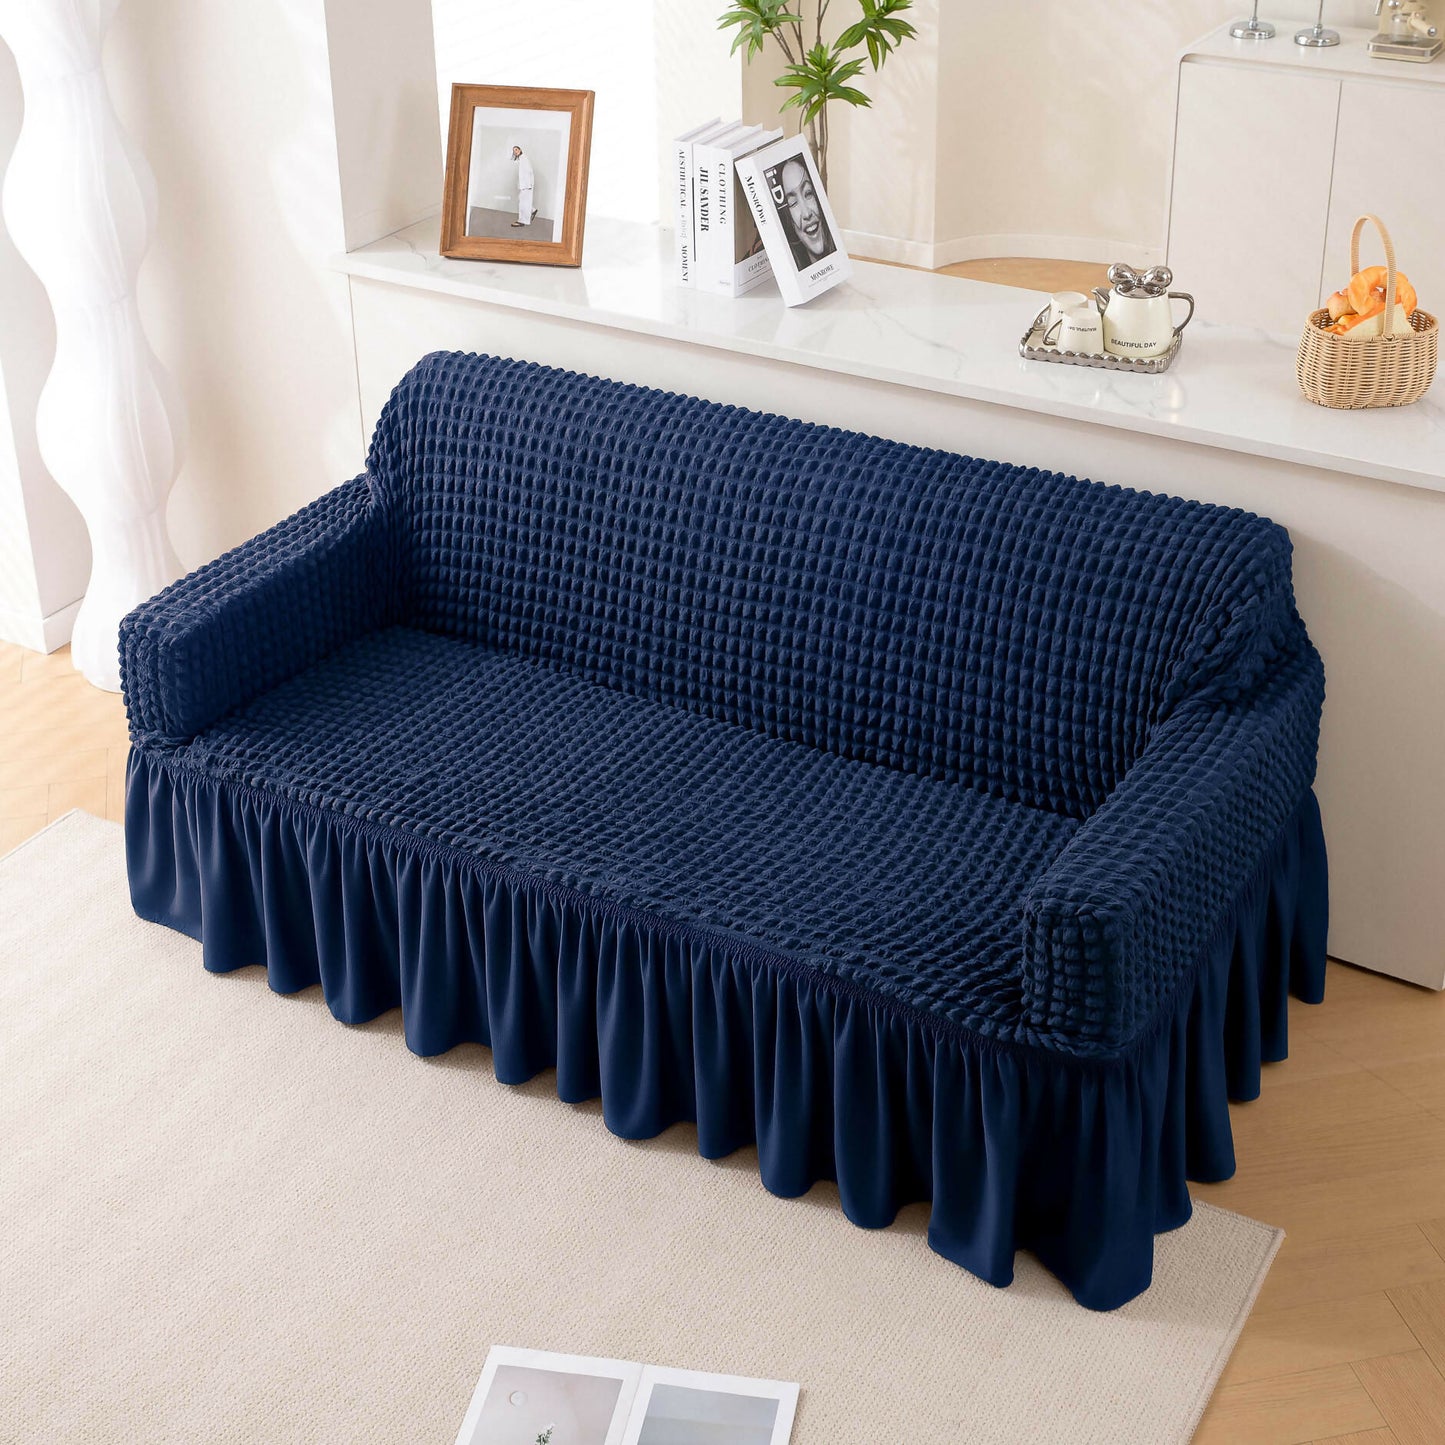 Stretchable Turkish Sofa Cover with Bubble Fabric & Frill